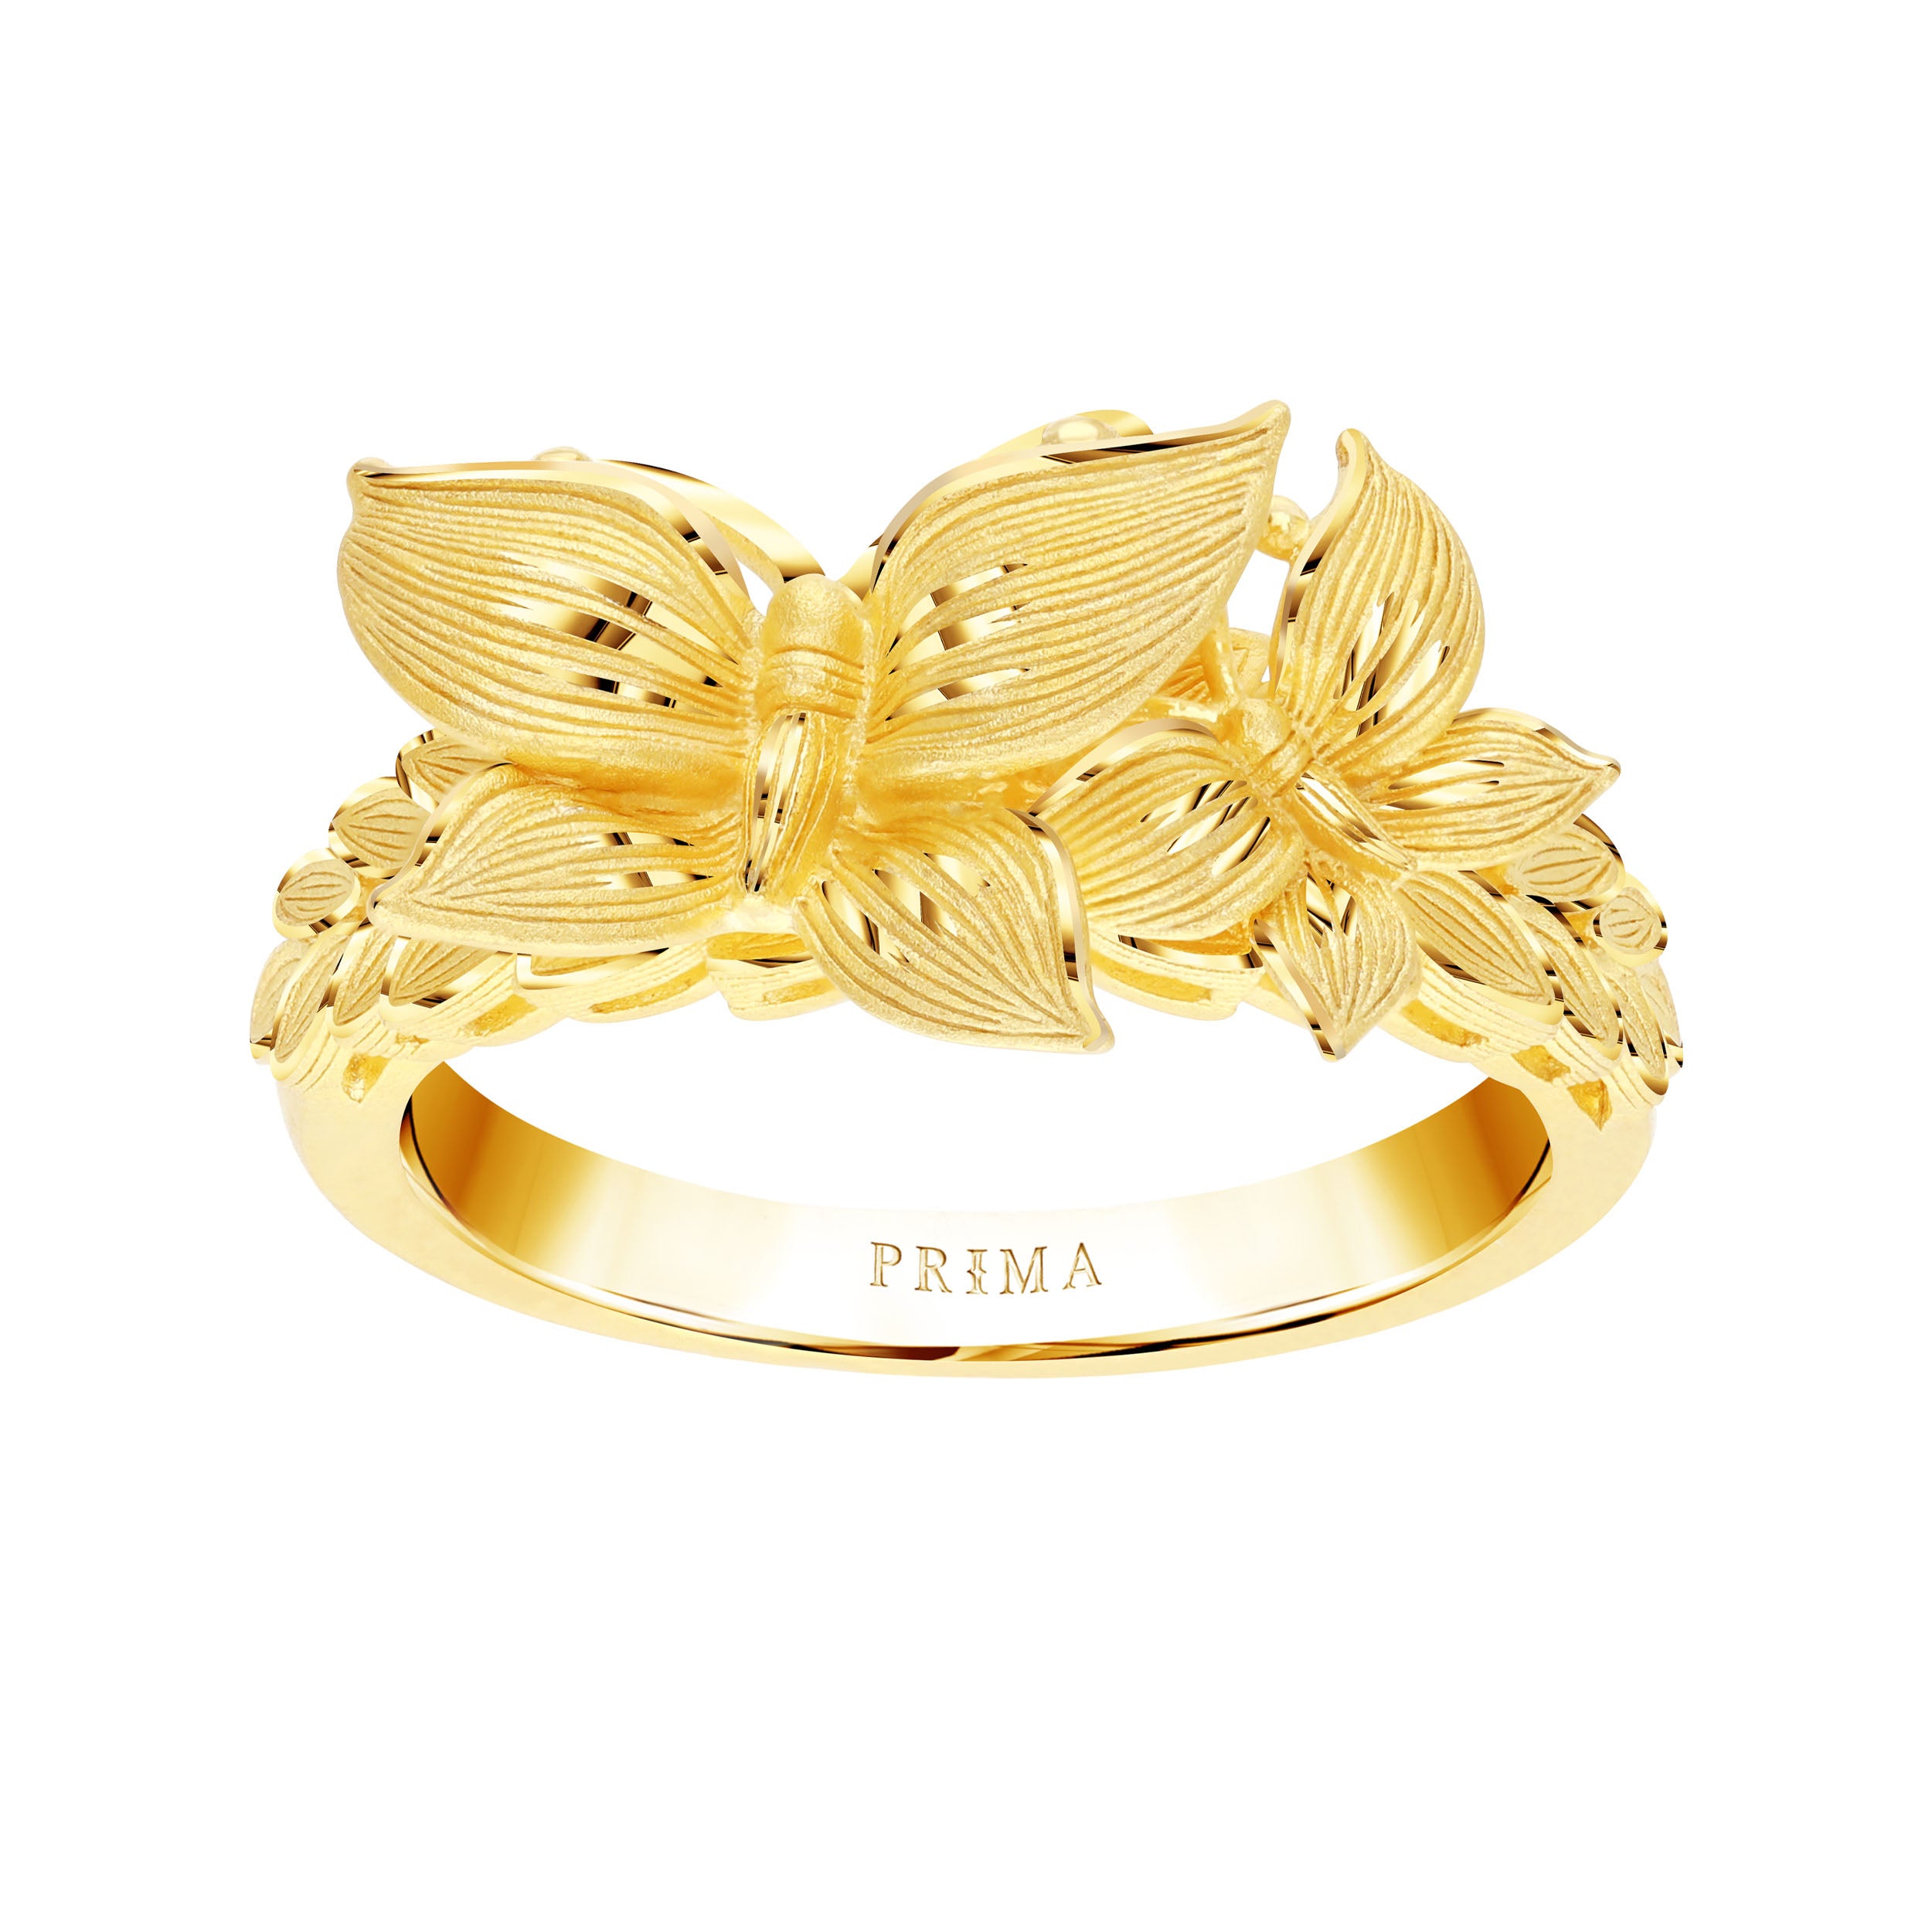 BUY GOLD RING FOR WOMEN AT BEST PRICES - WHP Jewellers